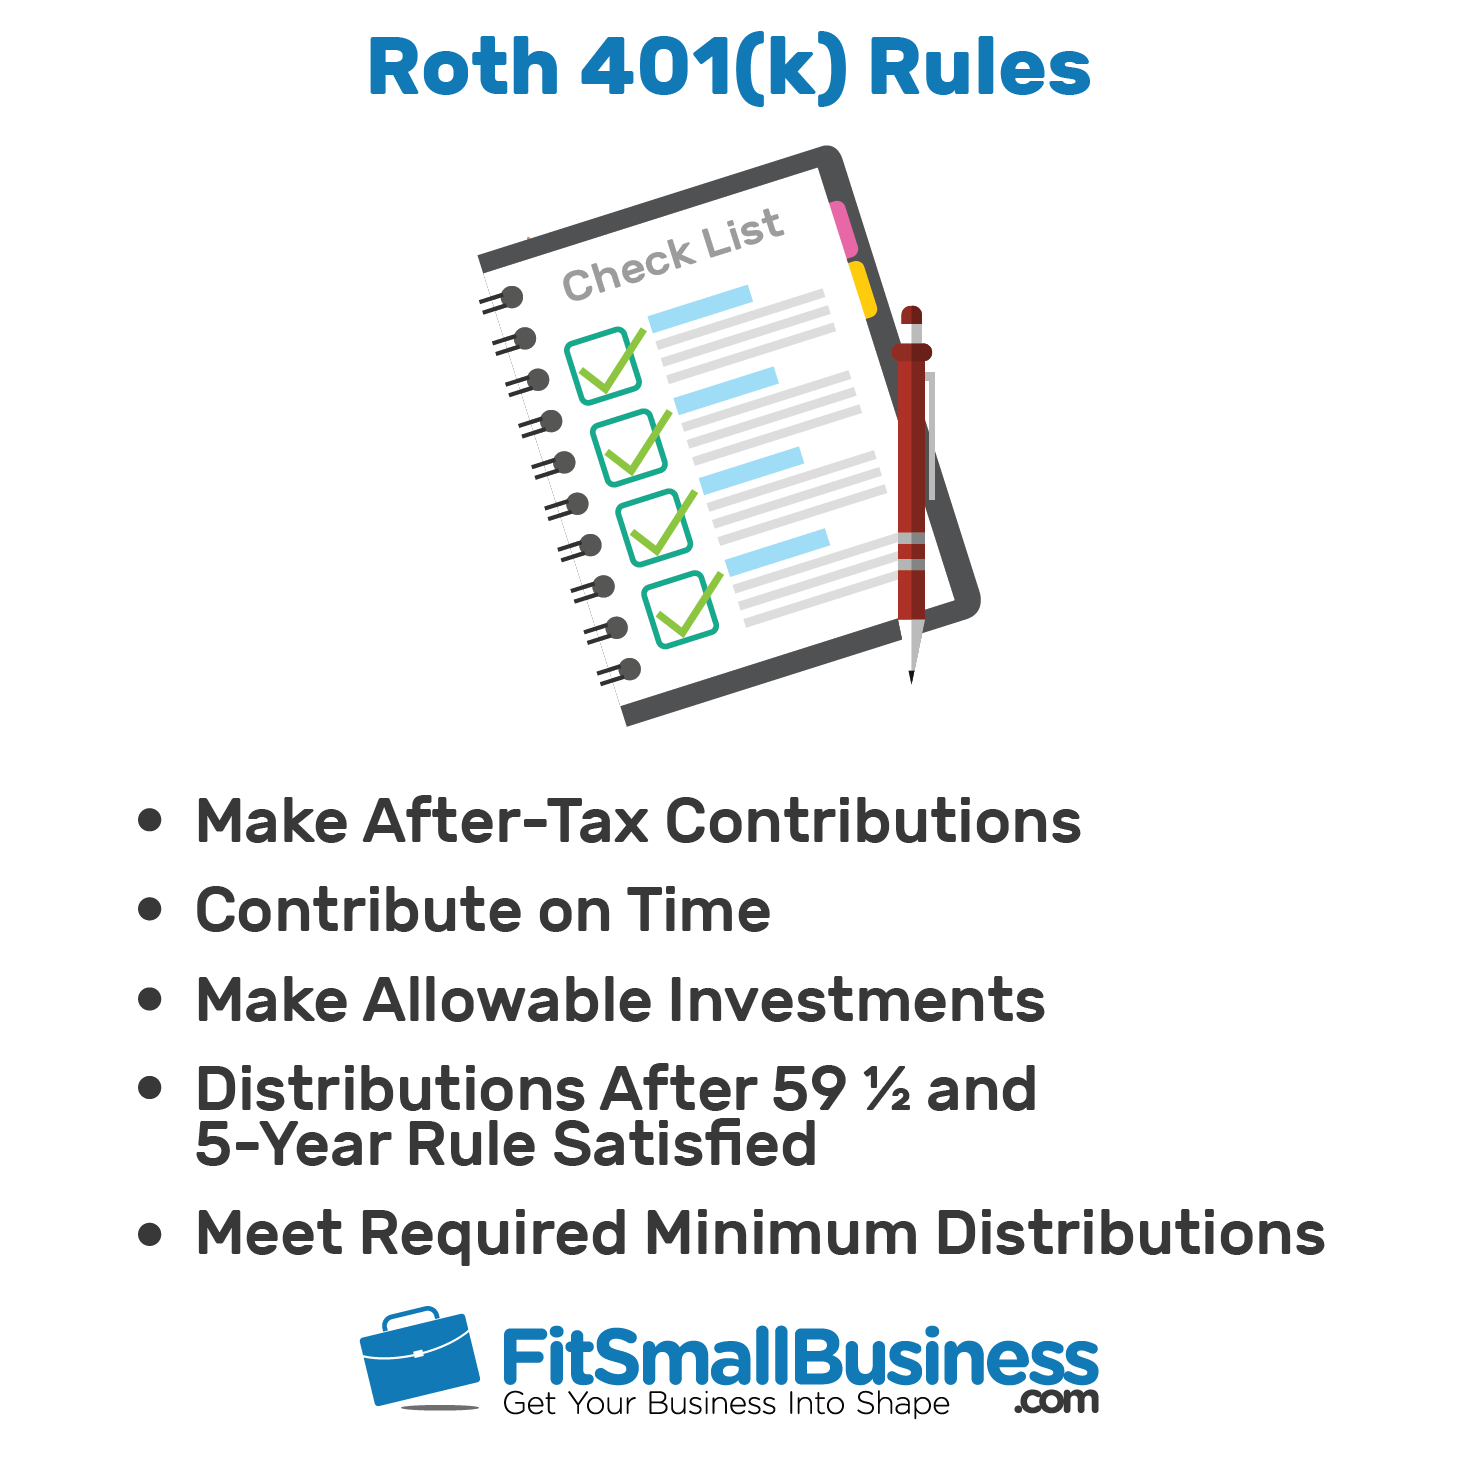 Roth 401(k) Rules, Contribution Limits & Deadlines Best Practice in HR